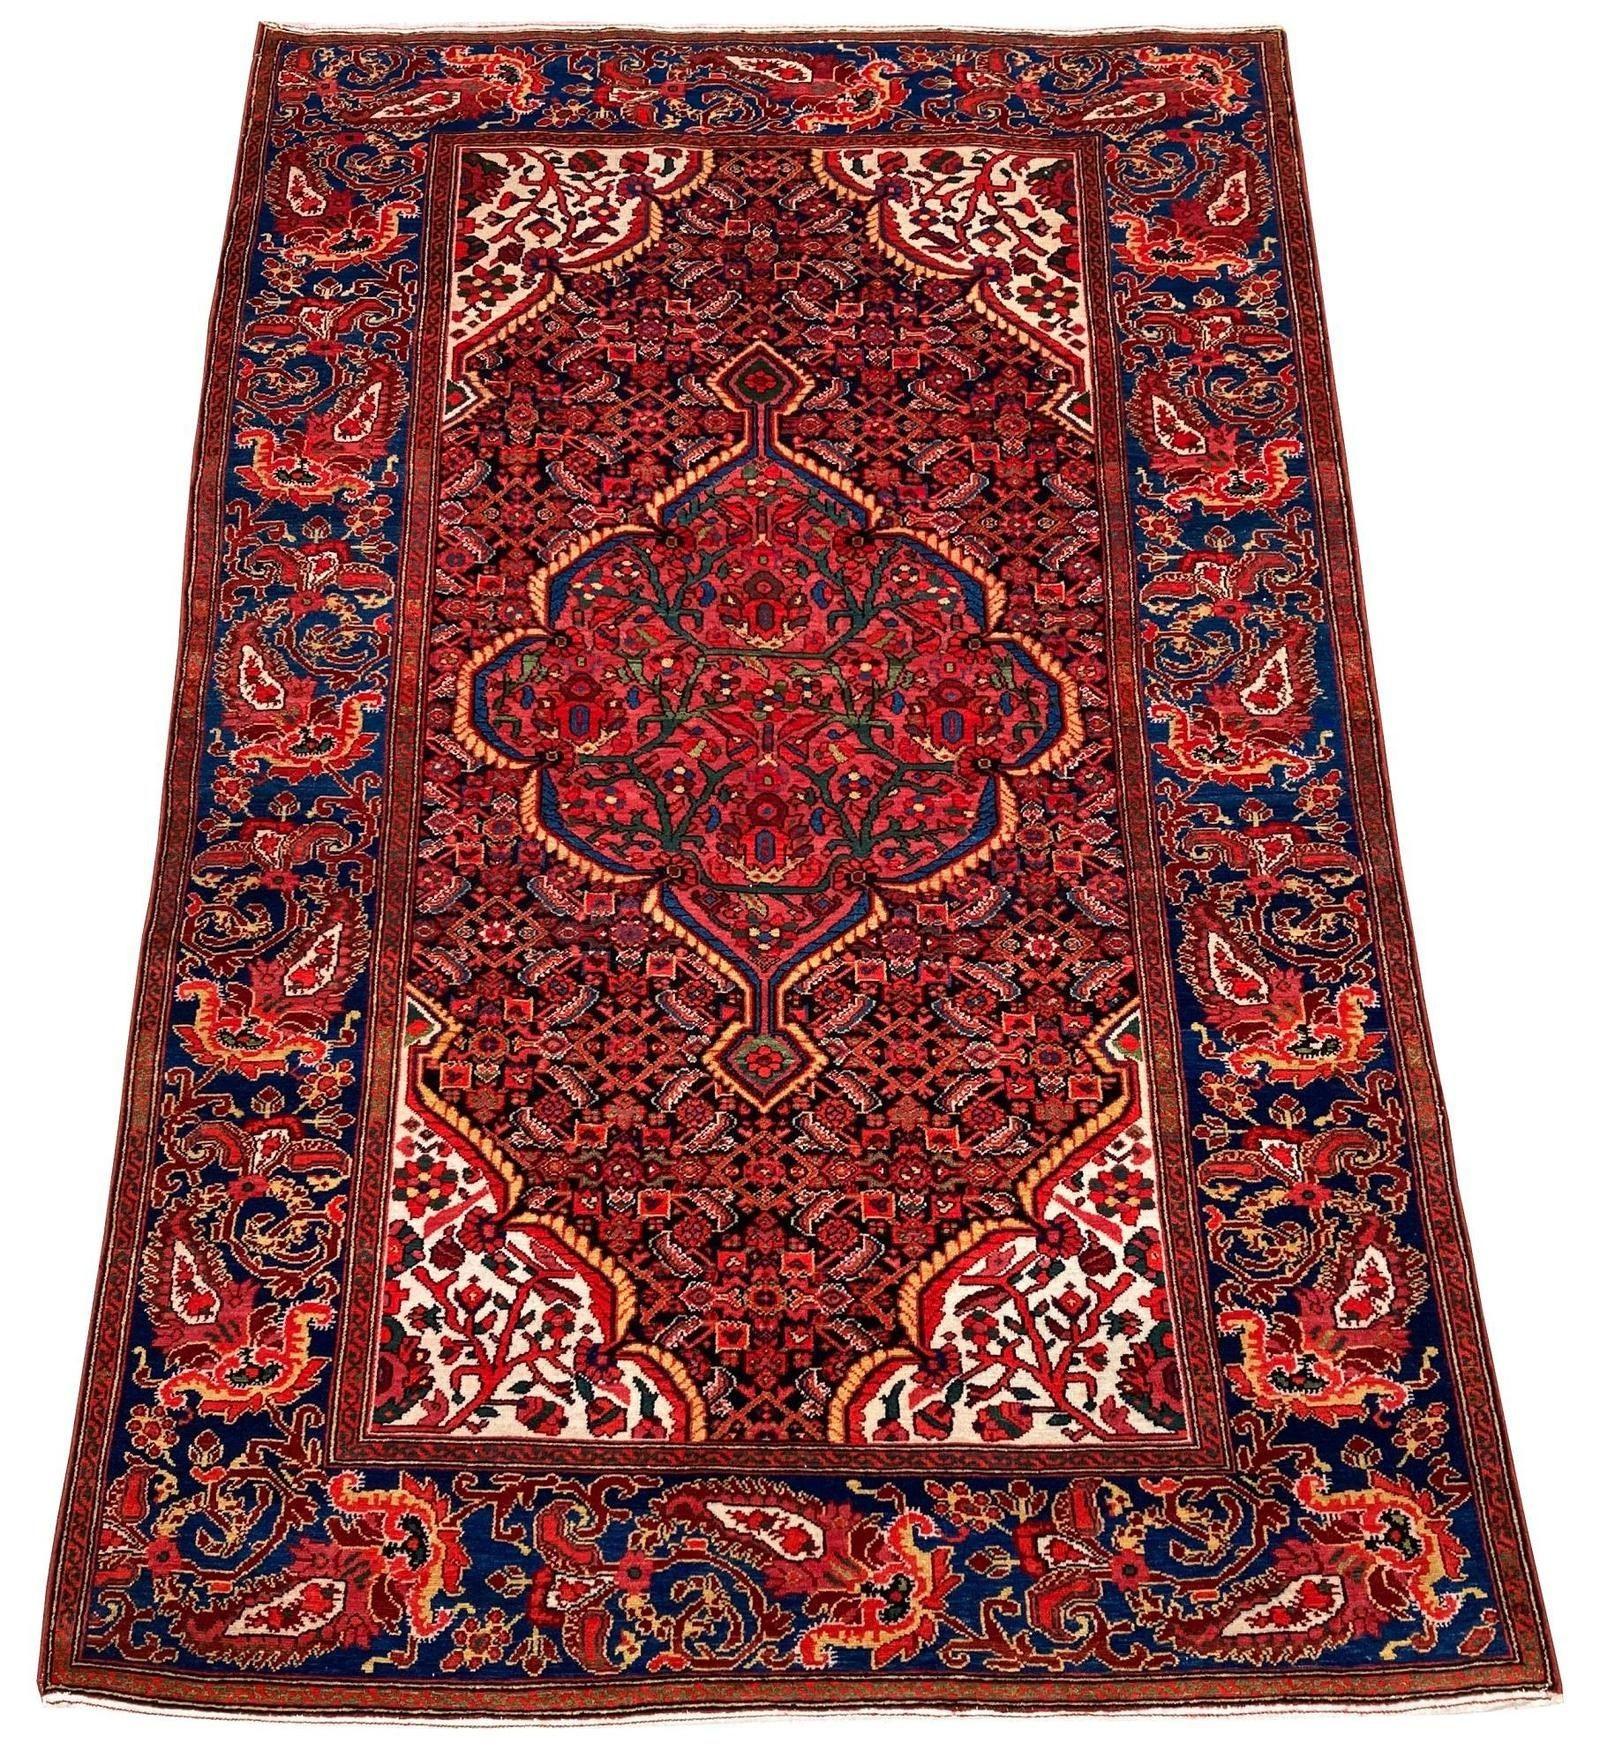 An exceptional antique Malayer rug, handwoven circa 1900 with a floral medallion on a navy blue Herati design field and particularly attractive mid blue border. This rug is in outstanding condition with a very fine weave, fabulous wool quality and